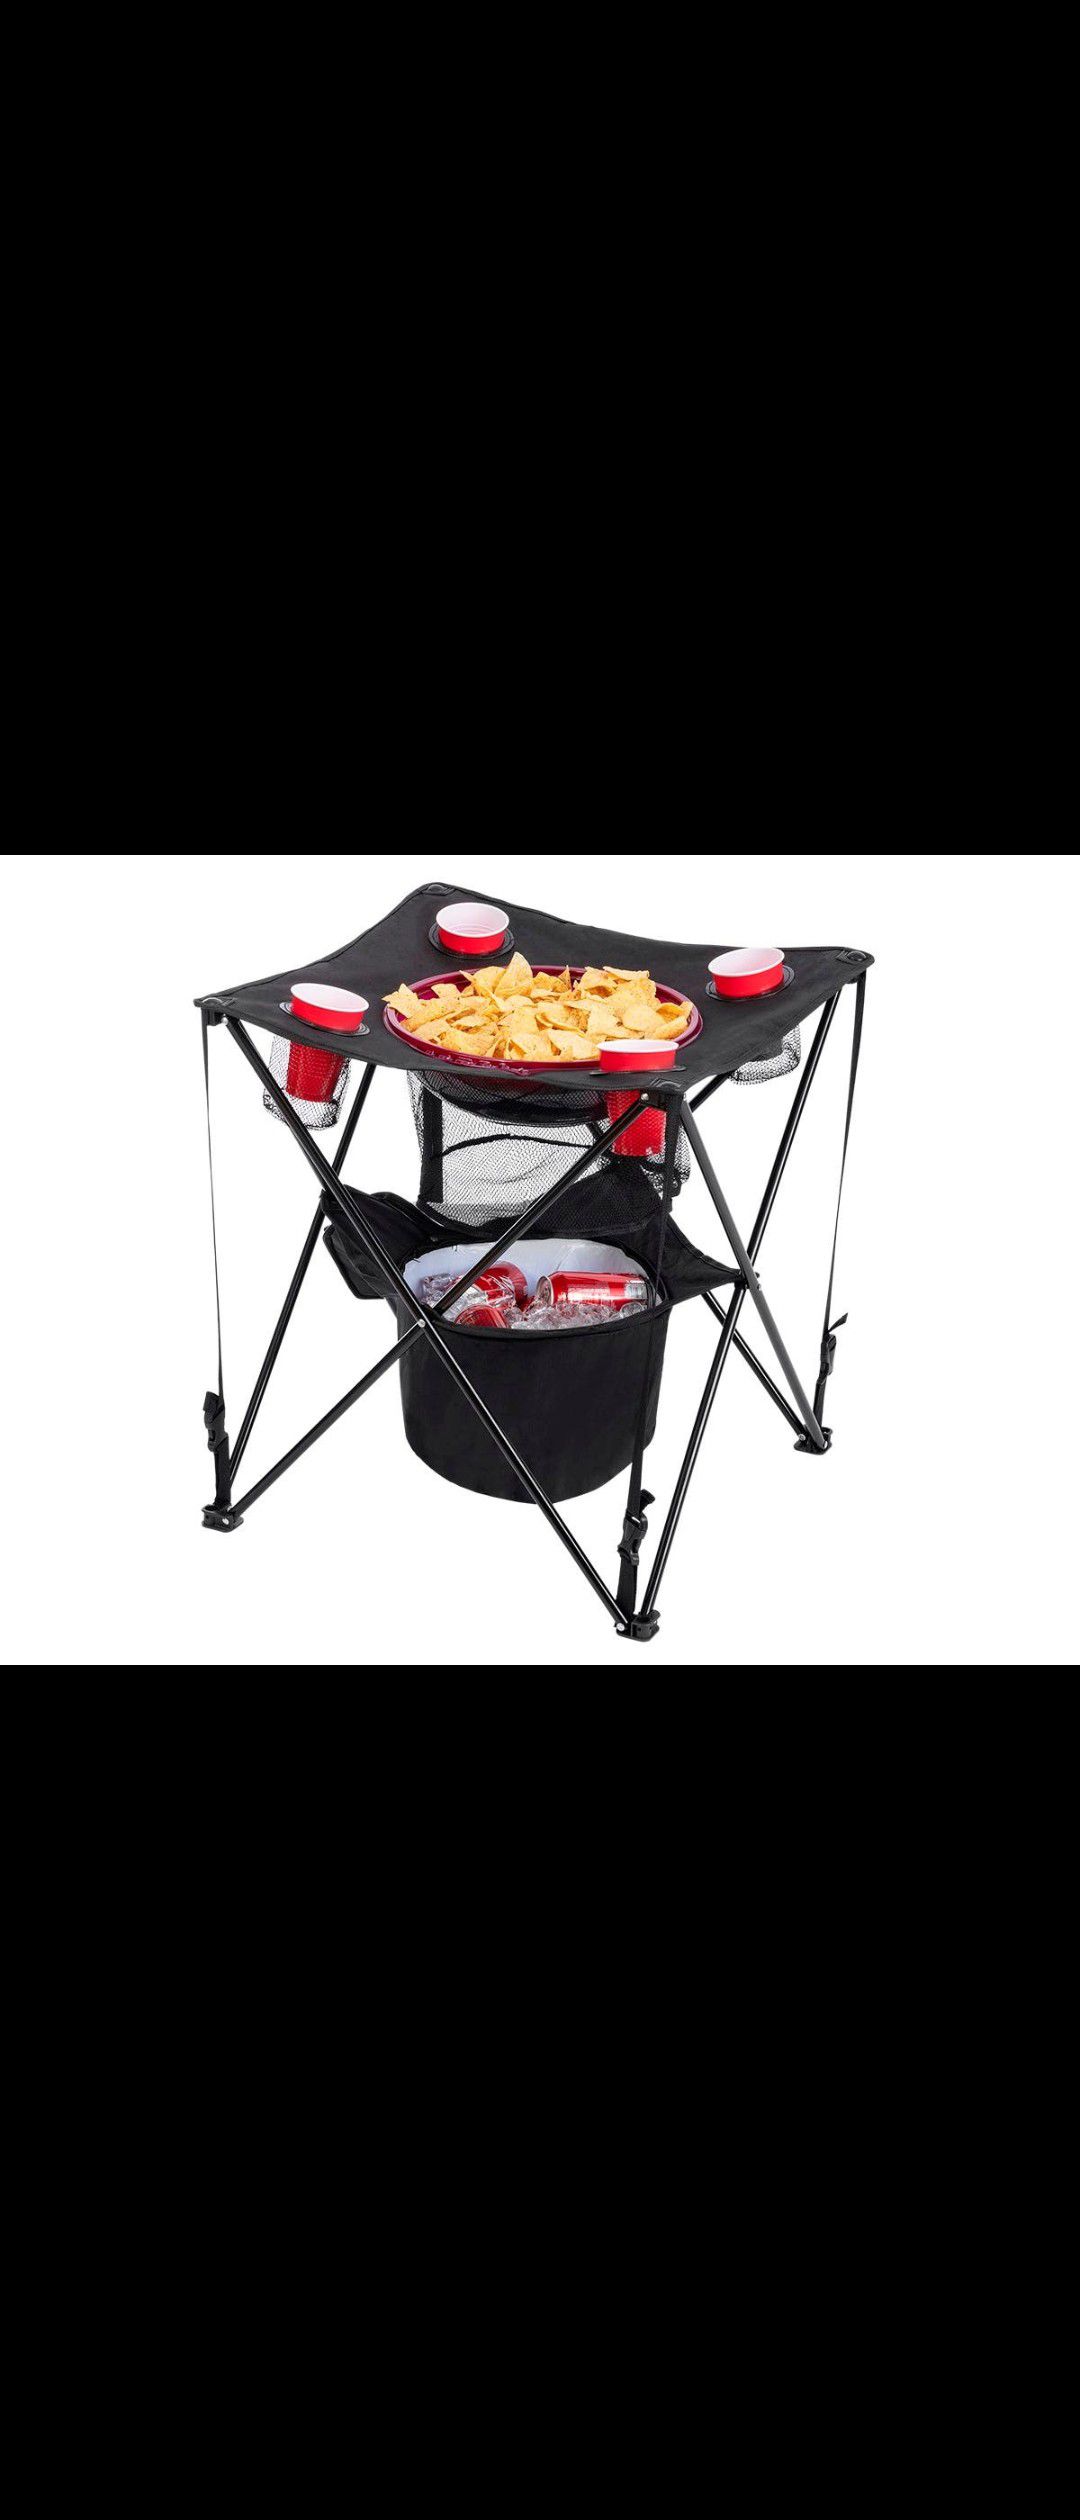 Tailgate table